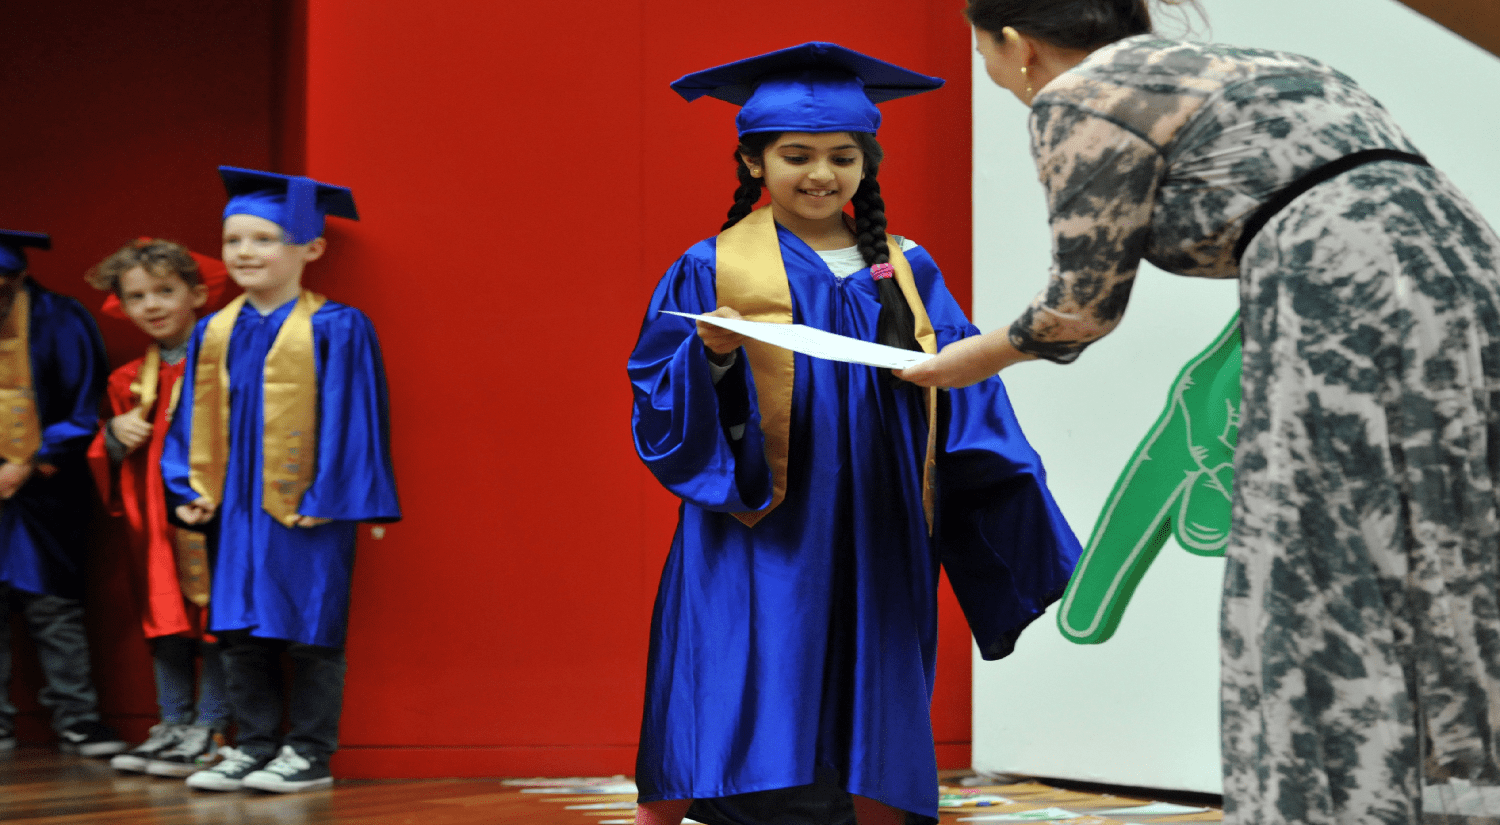 Young girl in blue gown receiving her children's university graduation certificate from the organiser